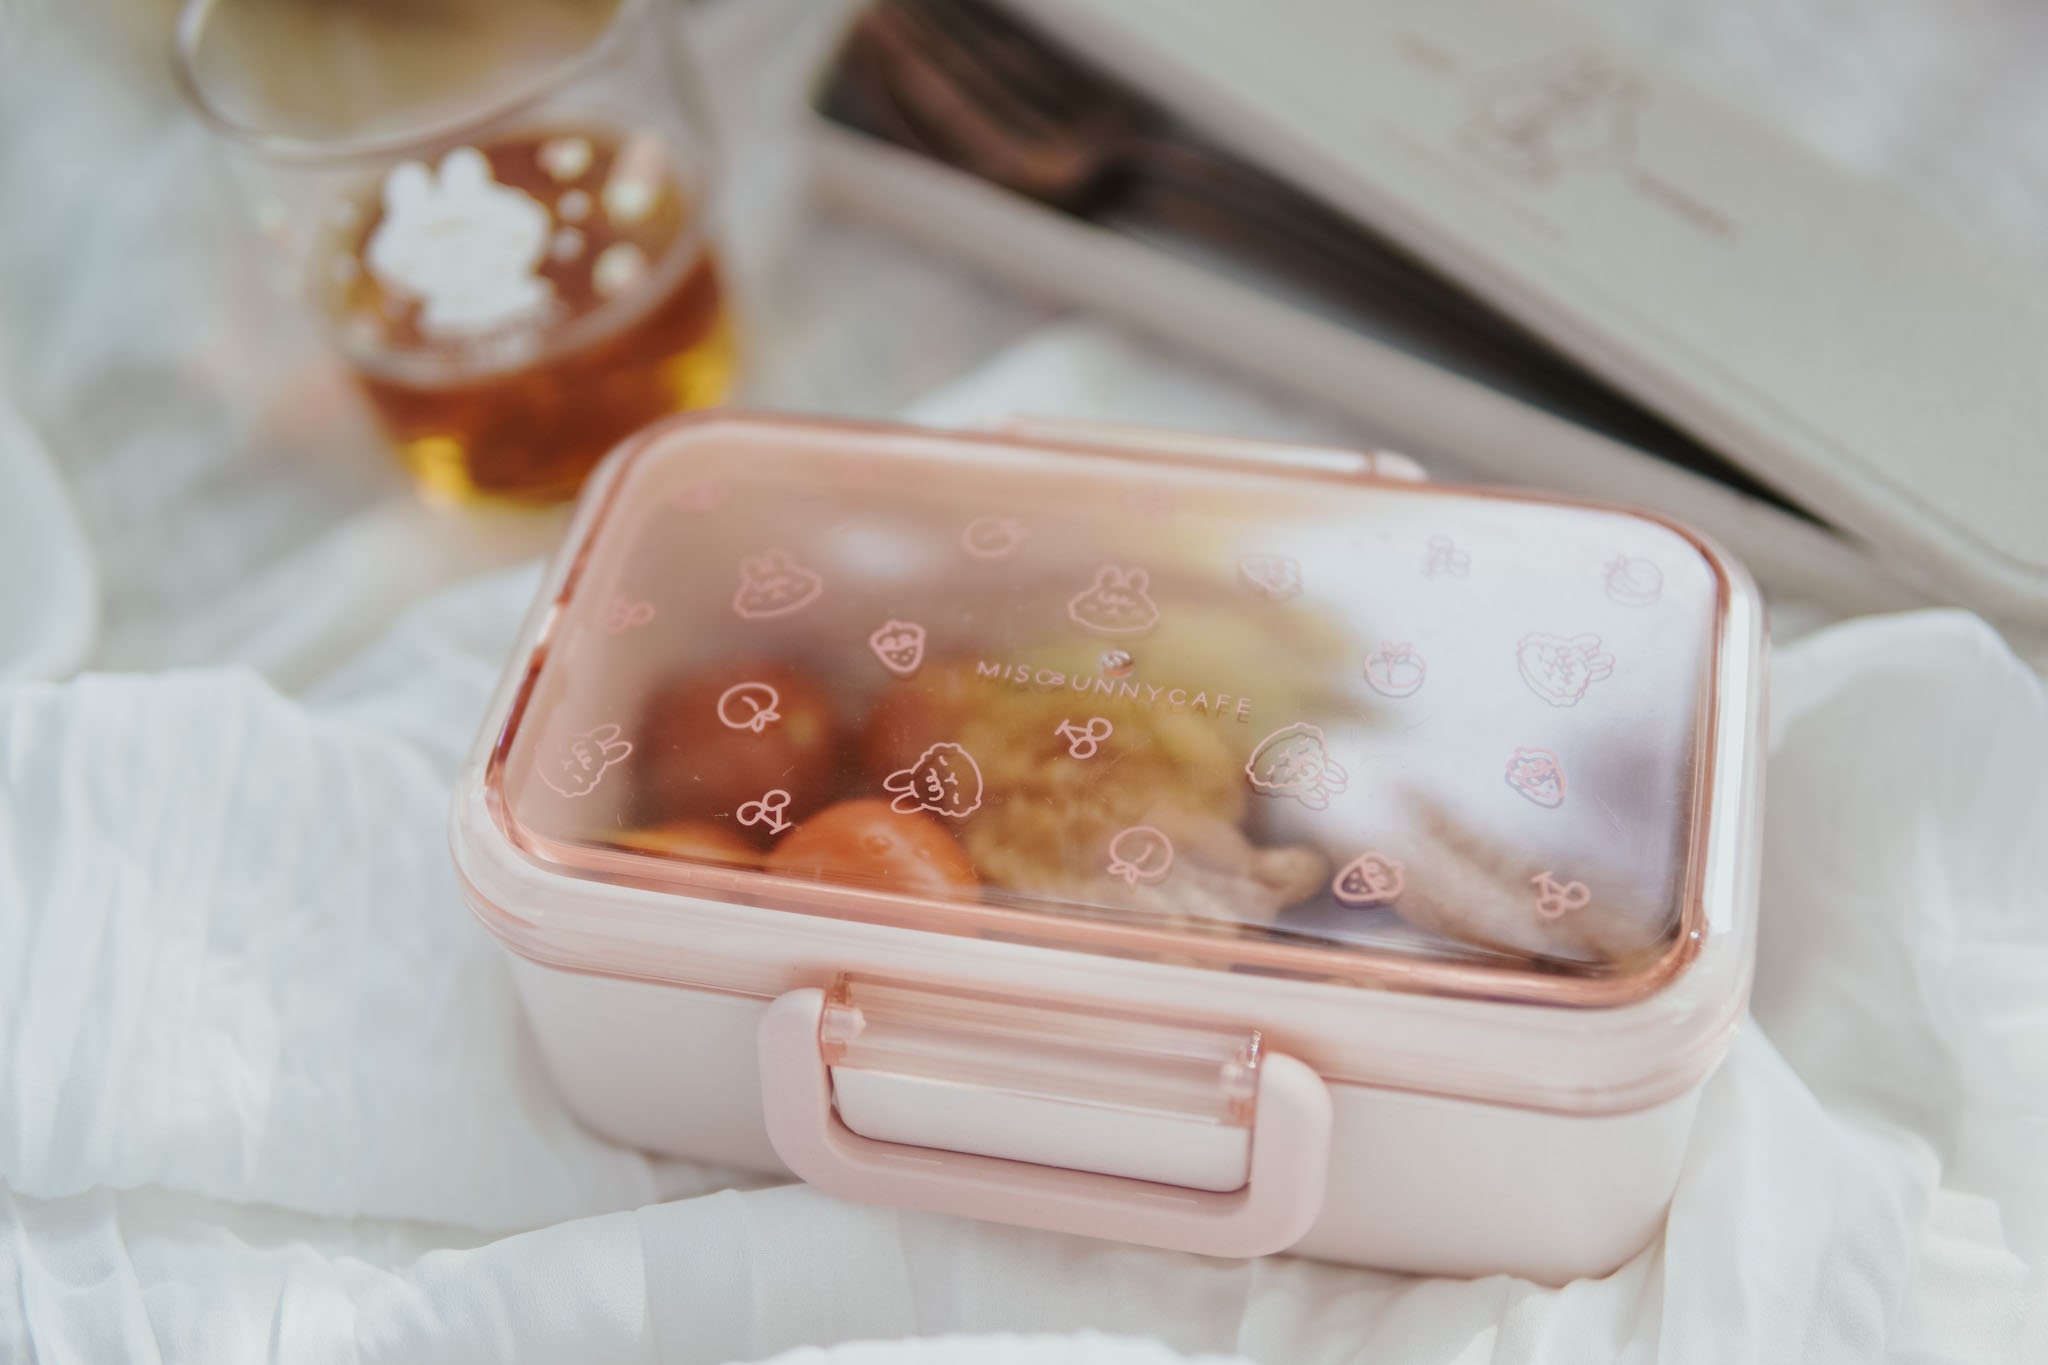 Kawaii bento boxes that I've always dreamed of making 🍱🌸 Which